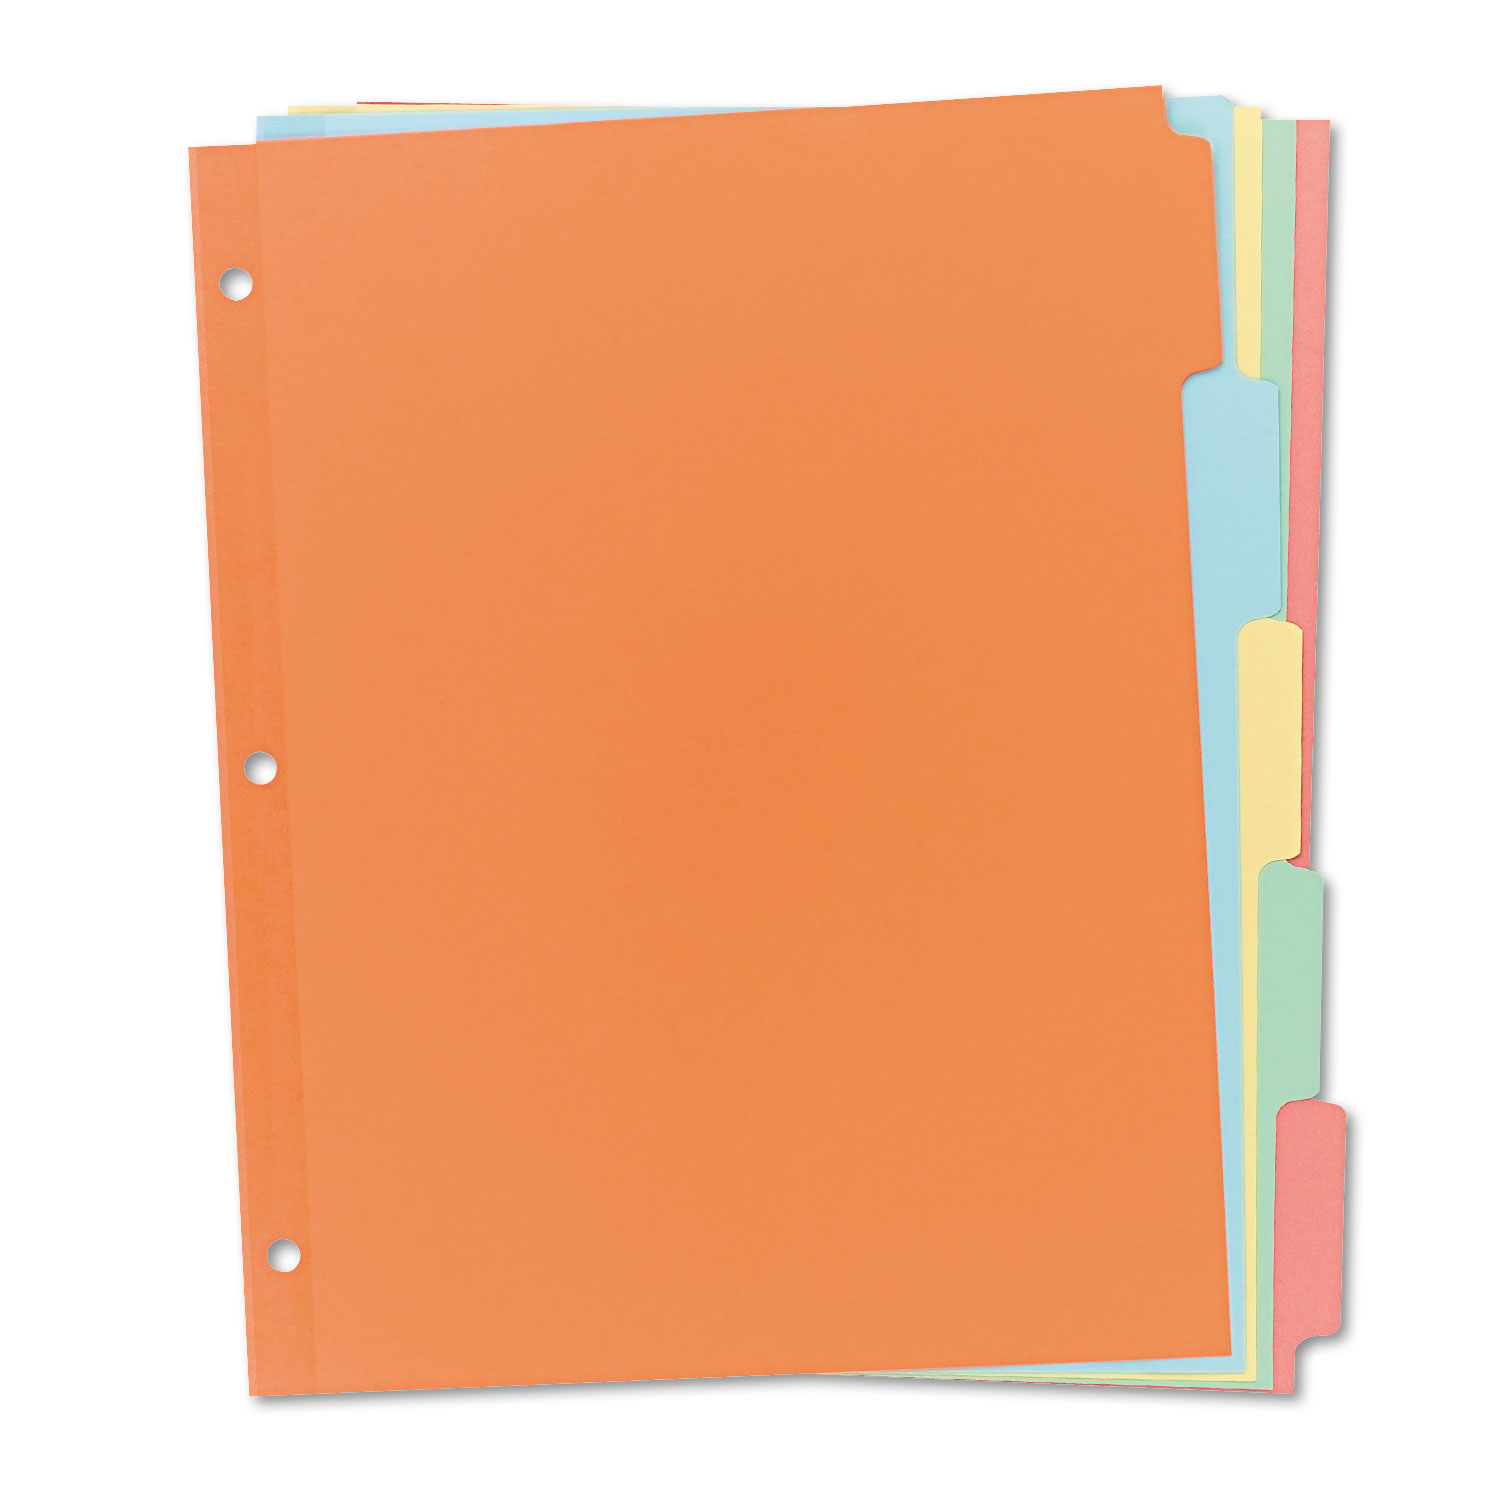  Avery 11508 Write & Erase Plain-Tab Paper Dividers, 5-Tab, Letter, Multicolor, 36 Sets (AVE11508) 